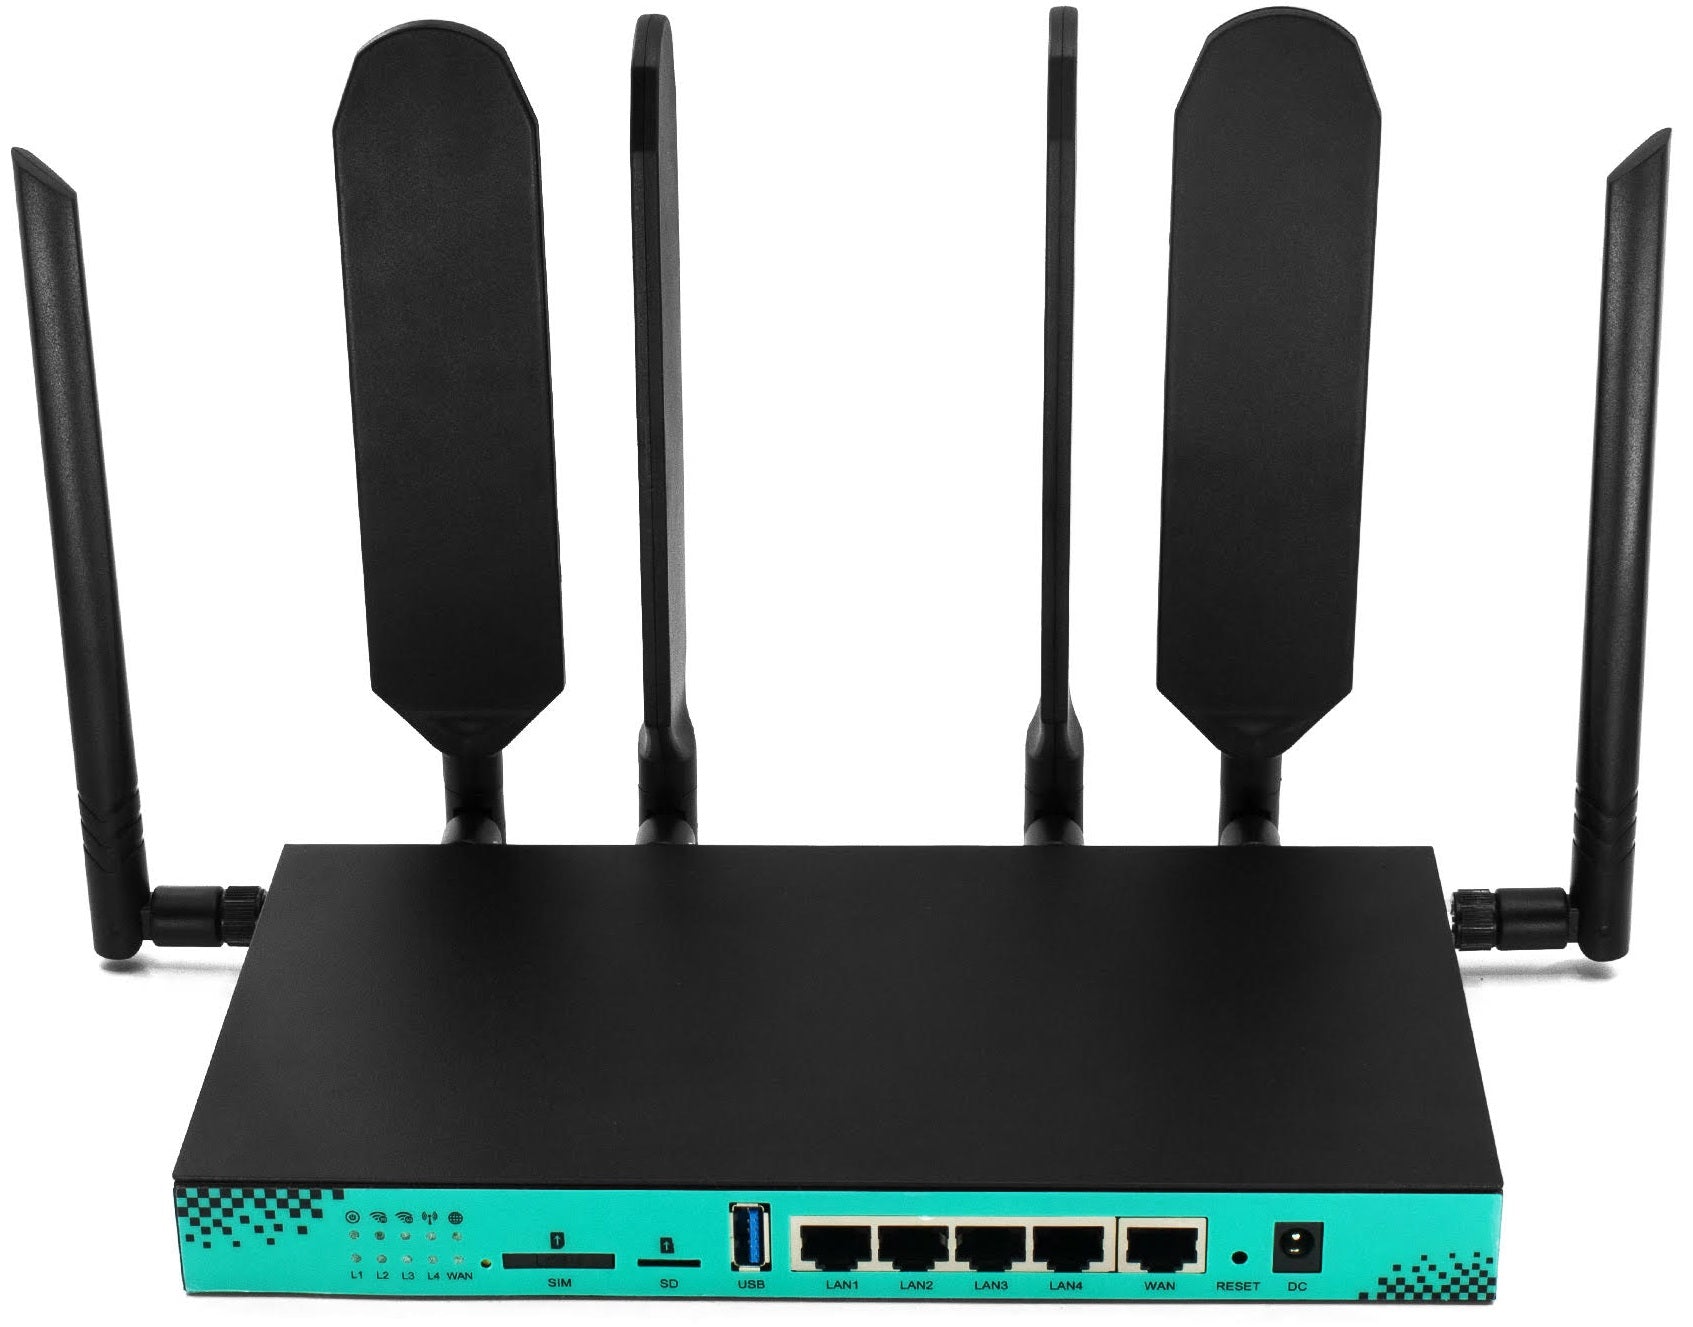 openWRT 5G LTE Router with latest RM500Q-AE 5G LTE Module - PRONTO NETWORKS  - smbWIFI